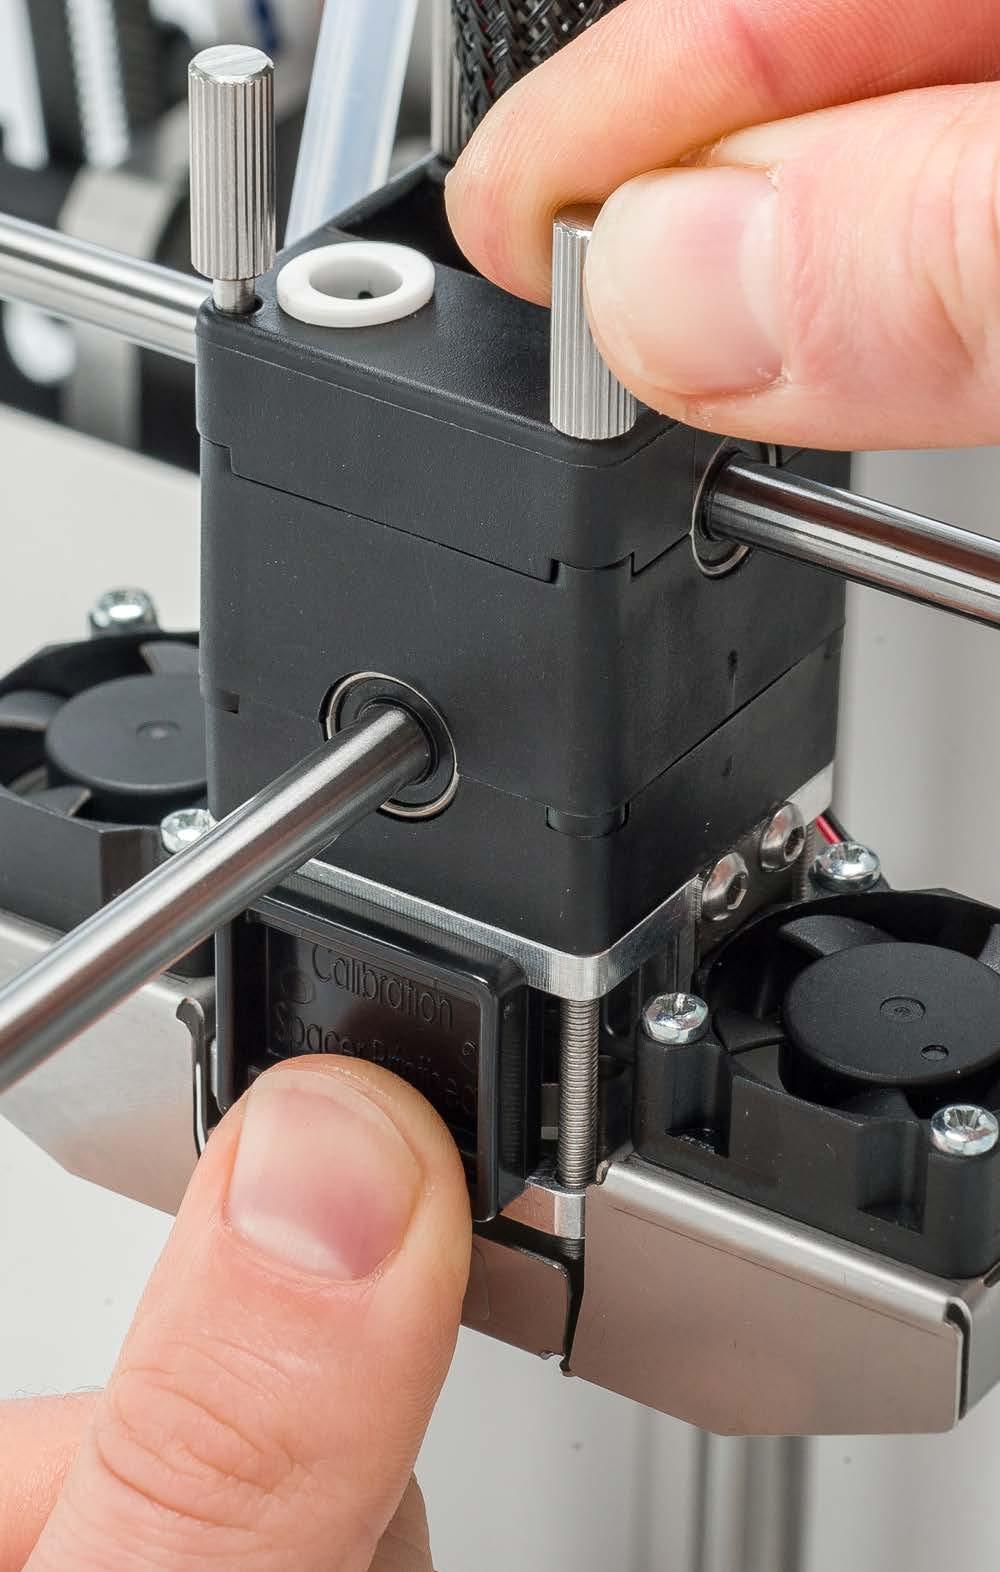 Tighten the front two thumb screws until the tool fits securely between the plates, but can still easily be